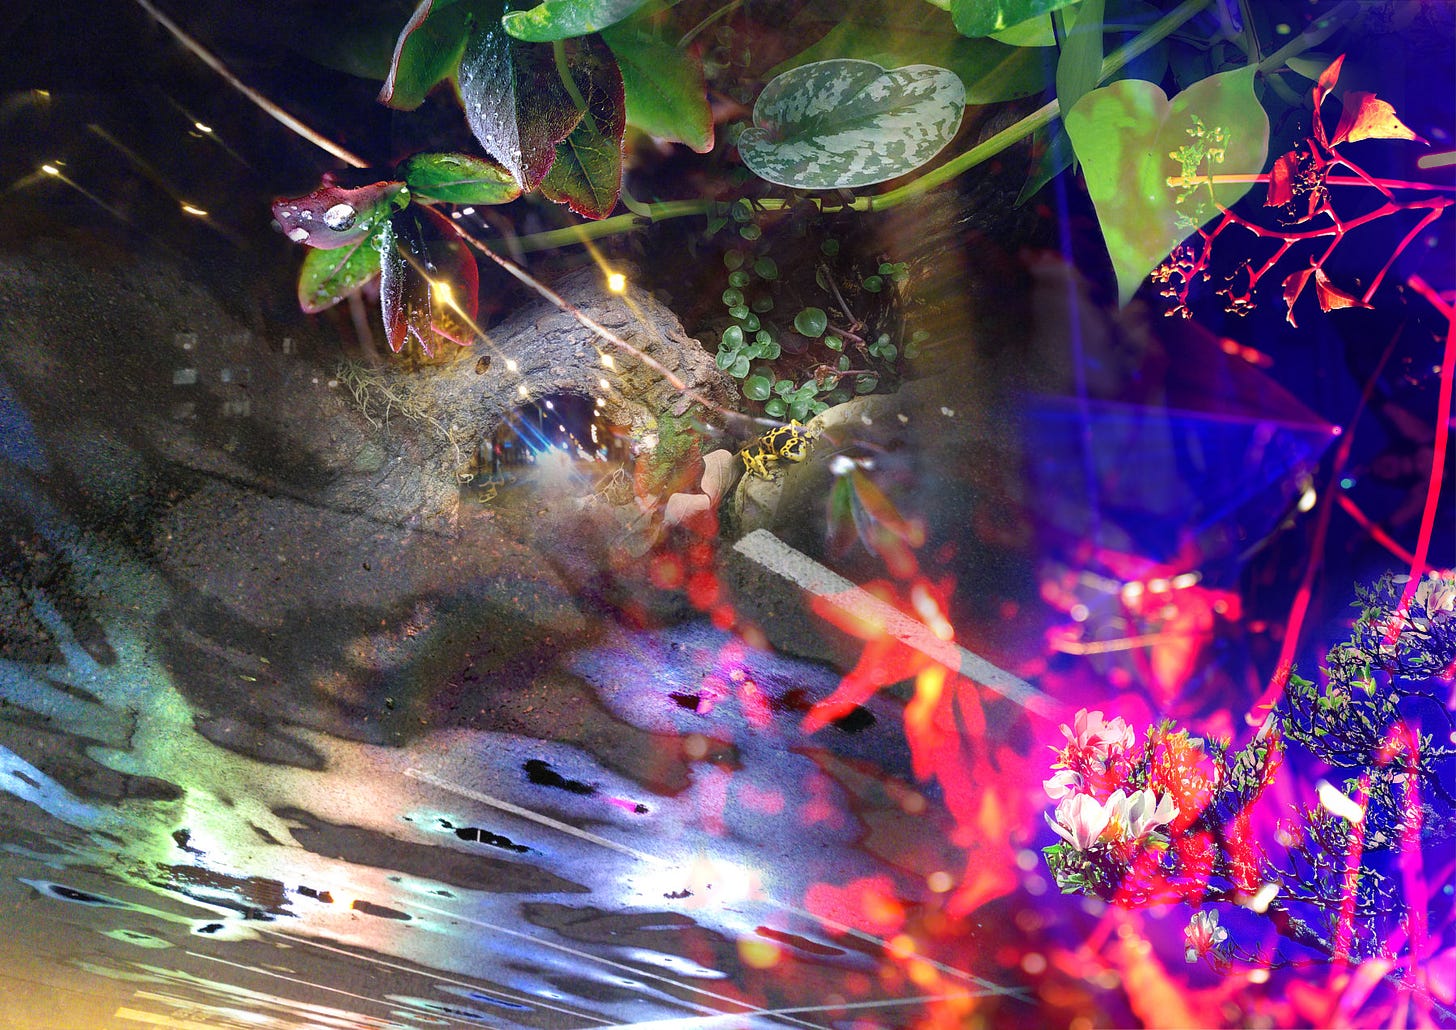 Digital collage consisting of a mix of photographs: plants, lights, dark night, water puddles, dew. A dancer.